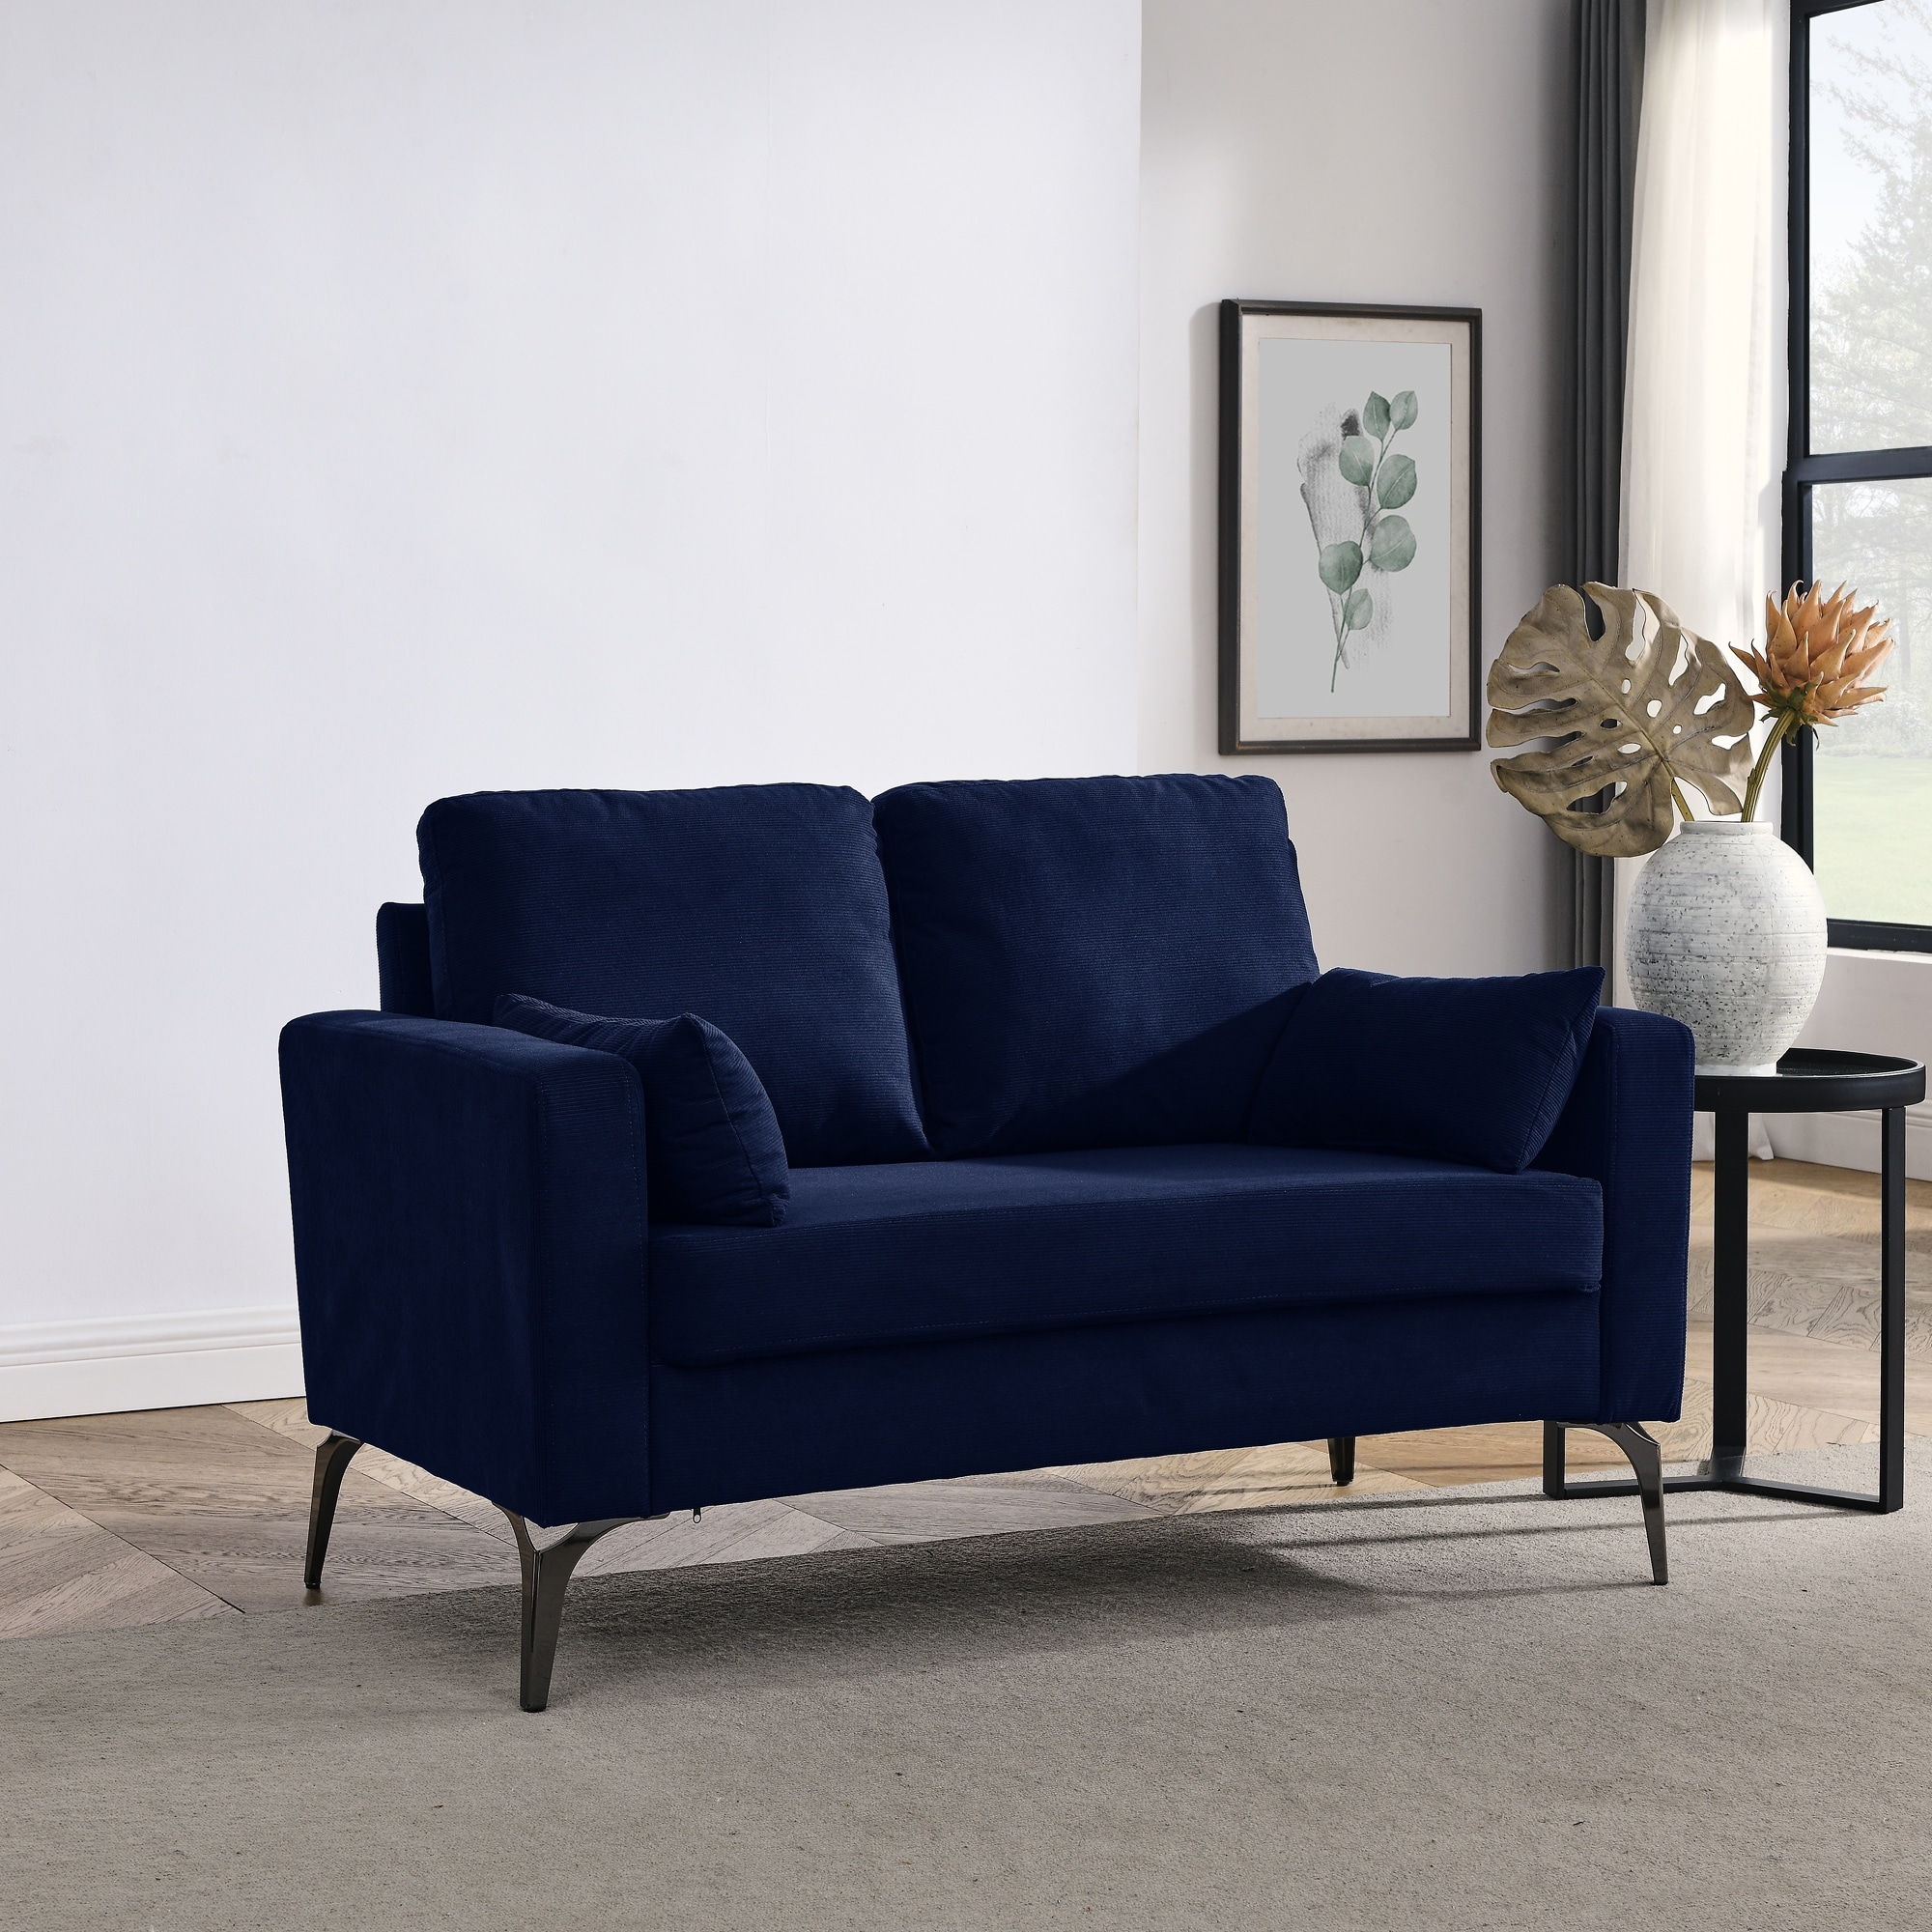 https://ak1.ostkcdn.com/images/products/is/images/direct/0df1e703f939ef350bf377dfeaa7f43714361040/Modern-Minimalist-Corduroy-Loveseat-Sofa-with-Two-Small-Pillows.jpg